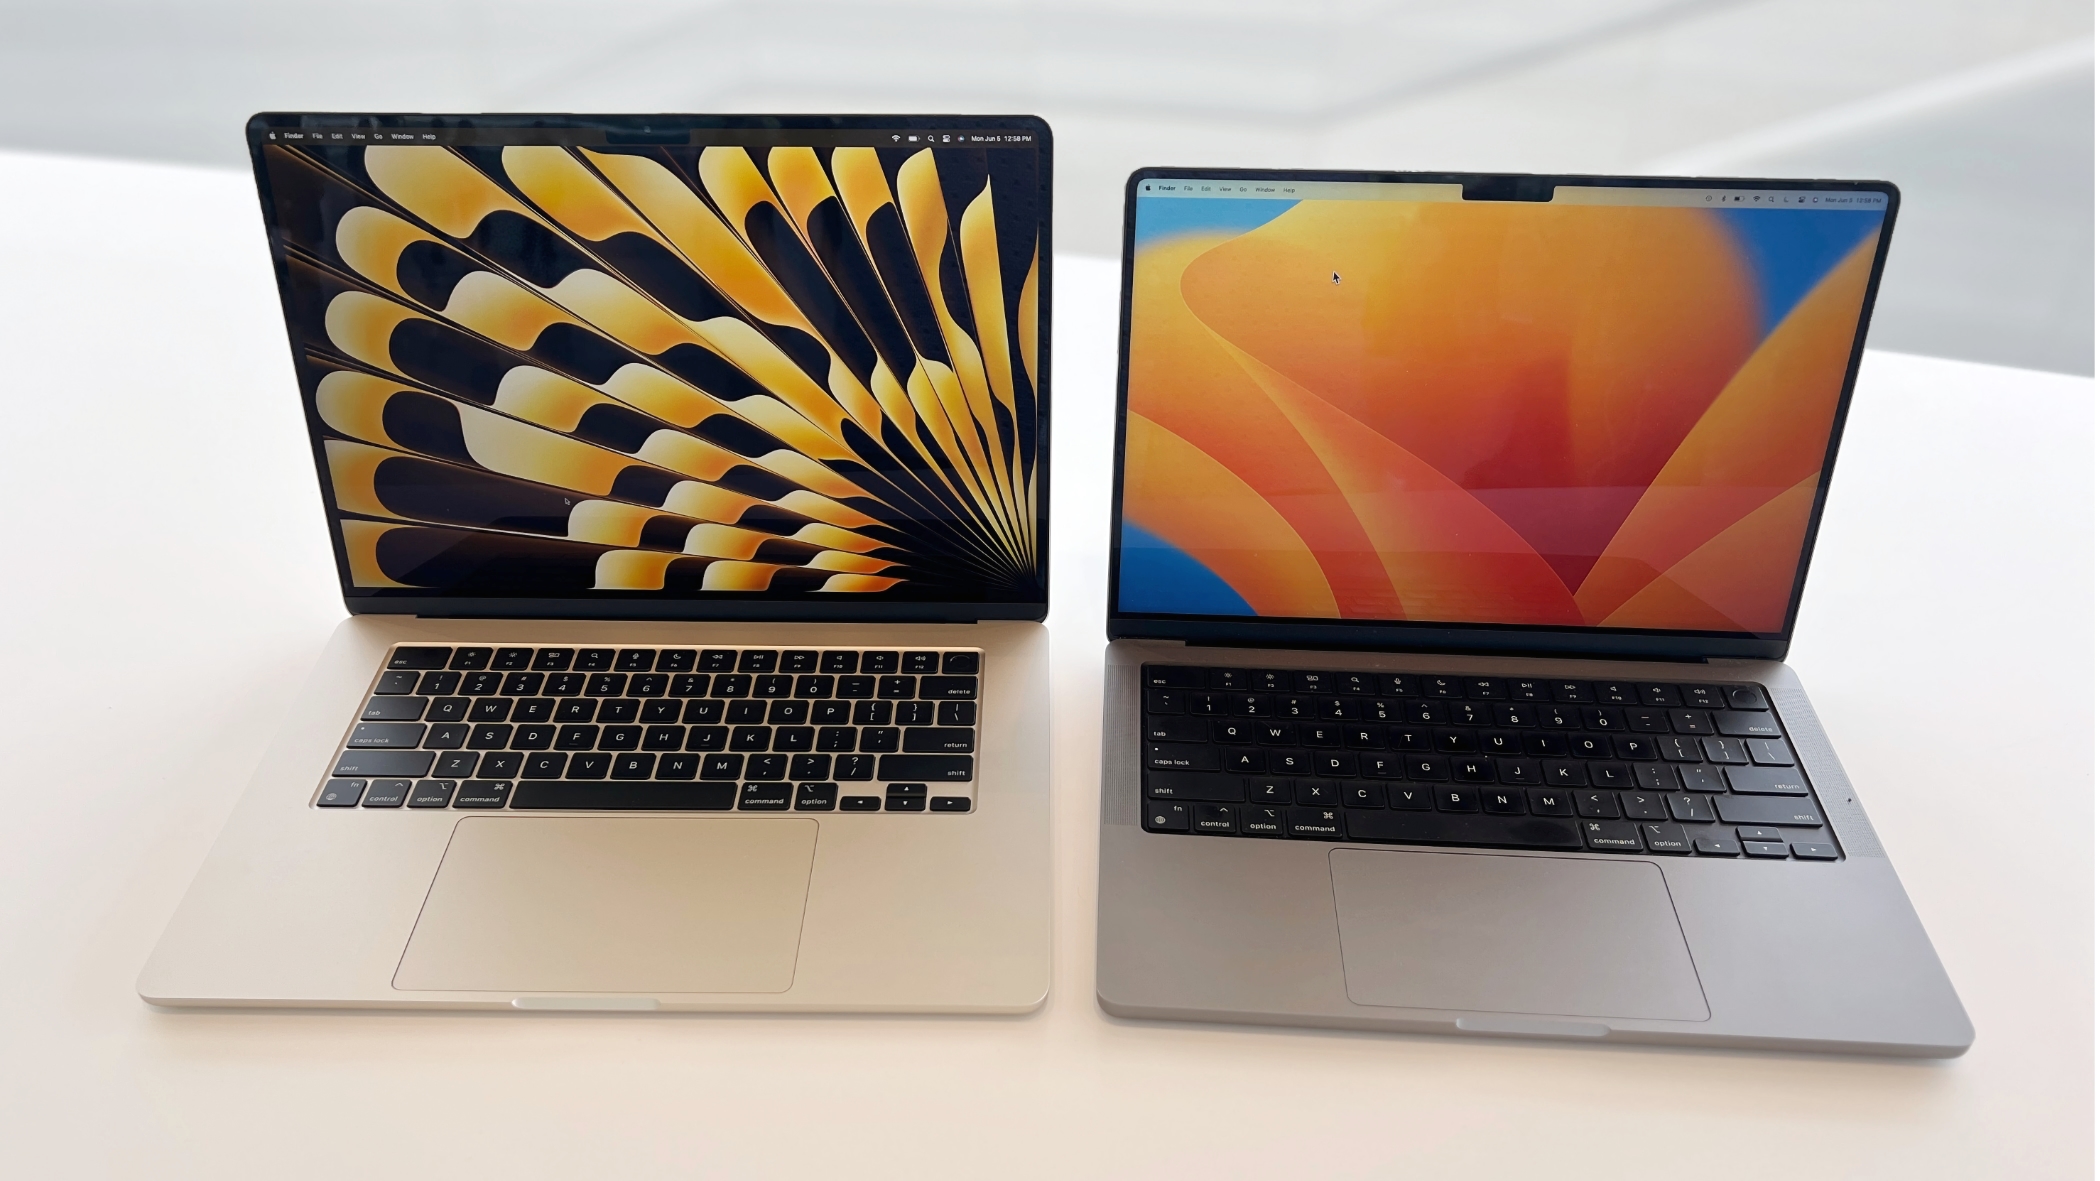 MacBook Air vs Pro: Differences between MacBook Air and Pro | Macworld